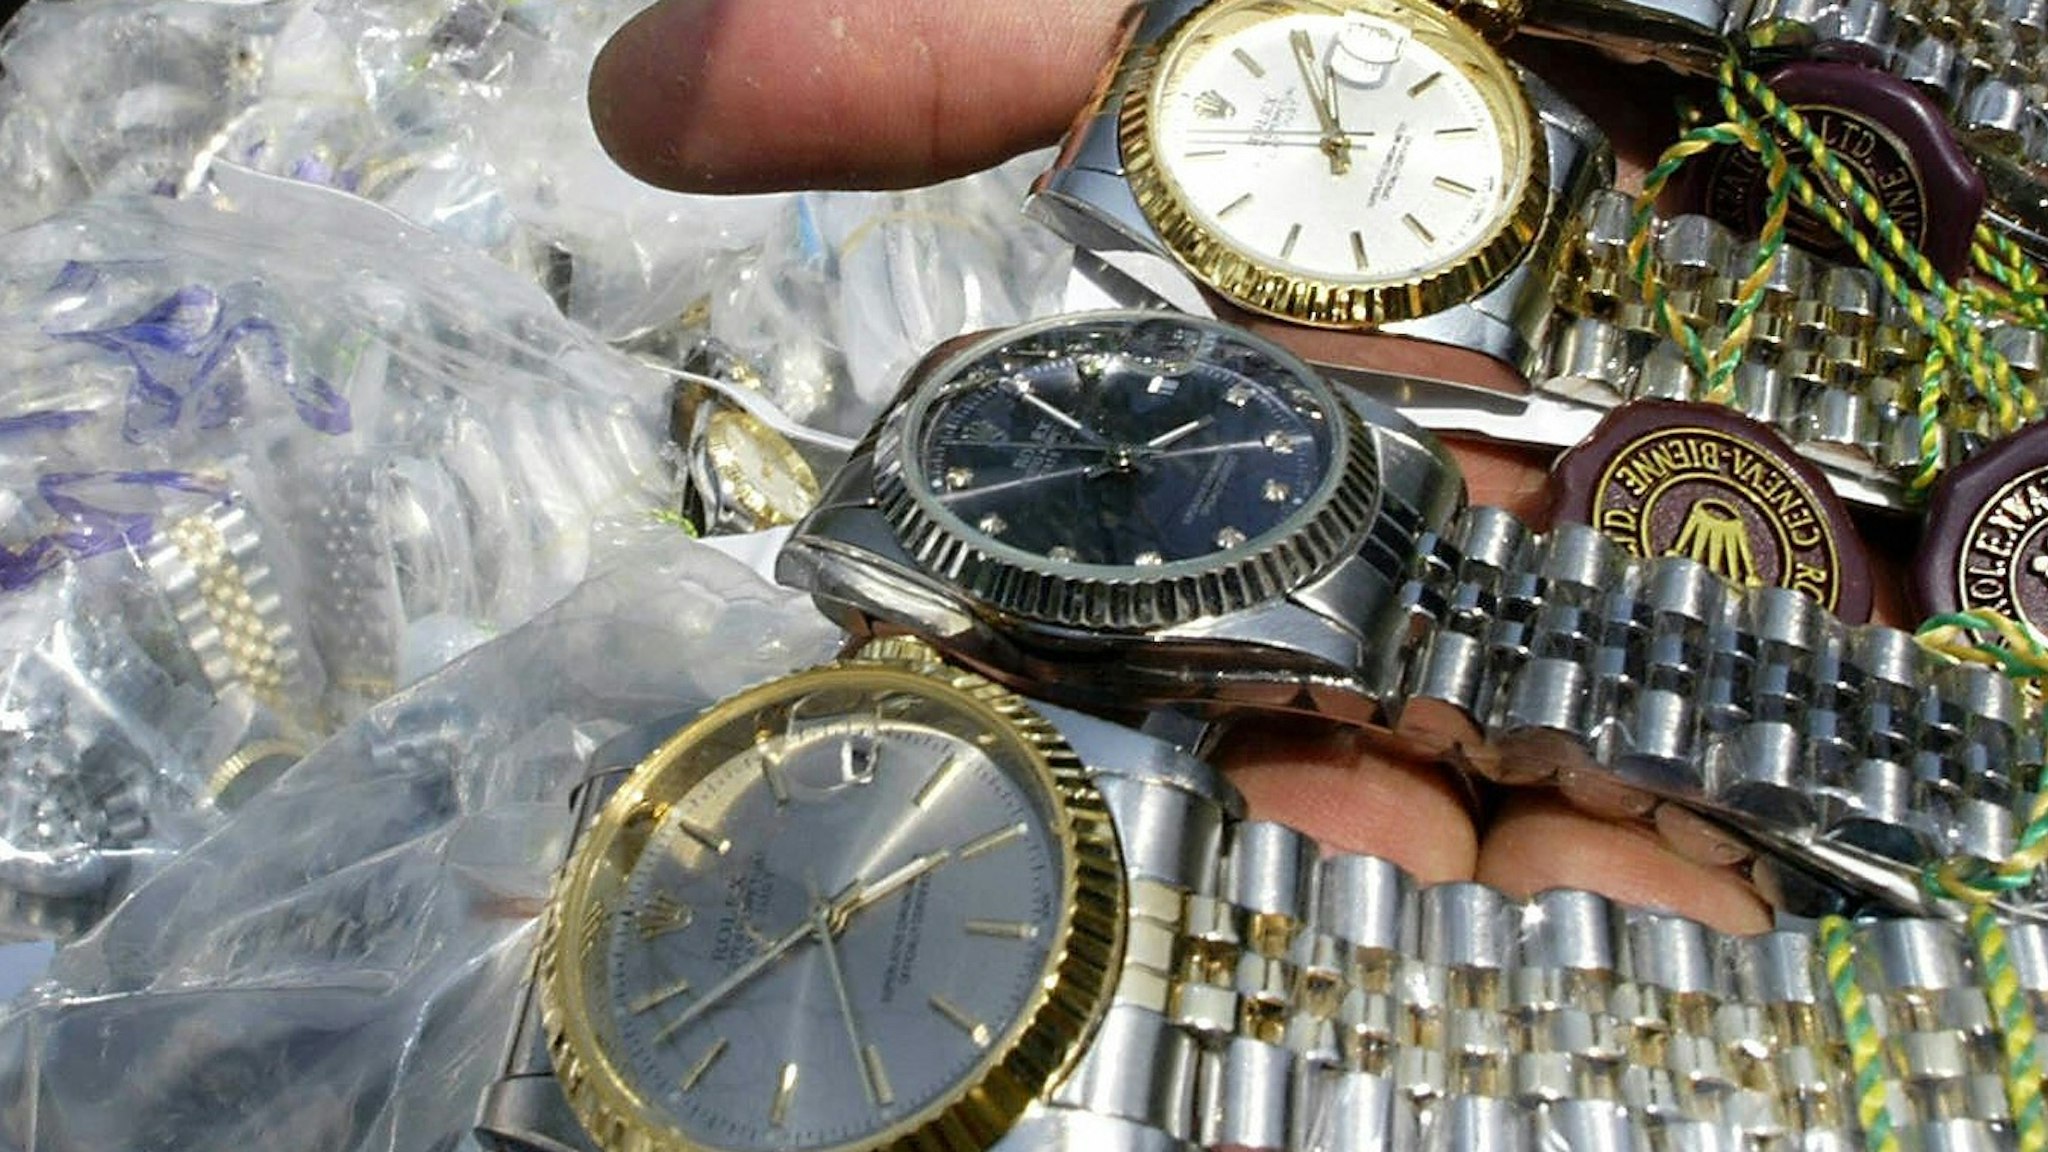 An unidentified Thai customs officer shows counterfeit Rolex watches confiscated in different raids during a display at the customs house in Bangkok, 11 March 2004.